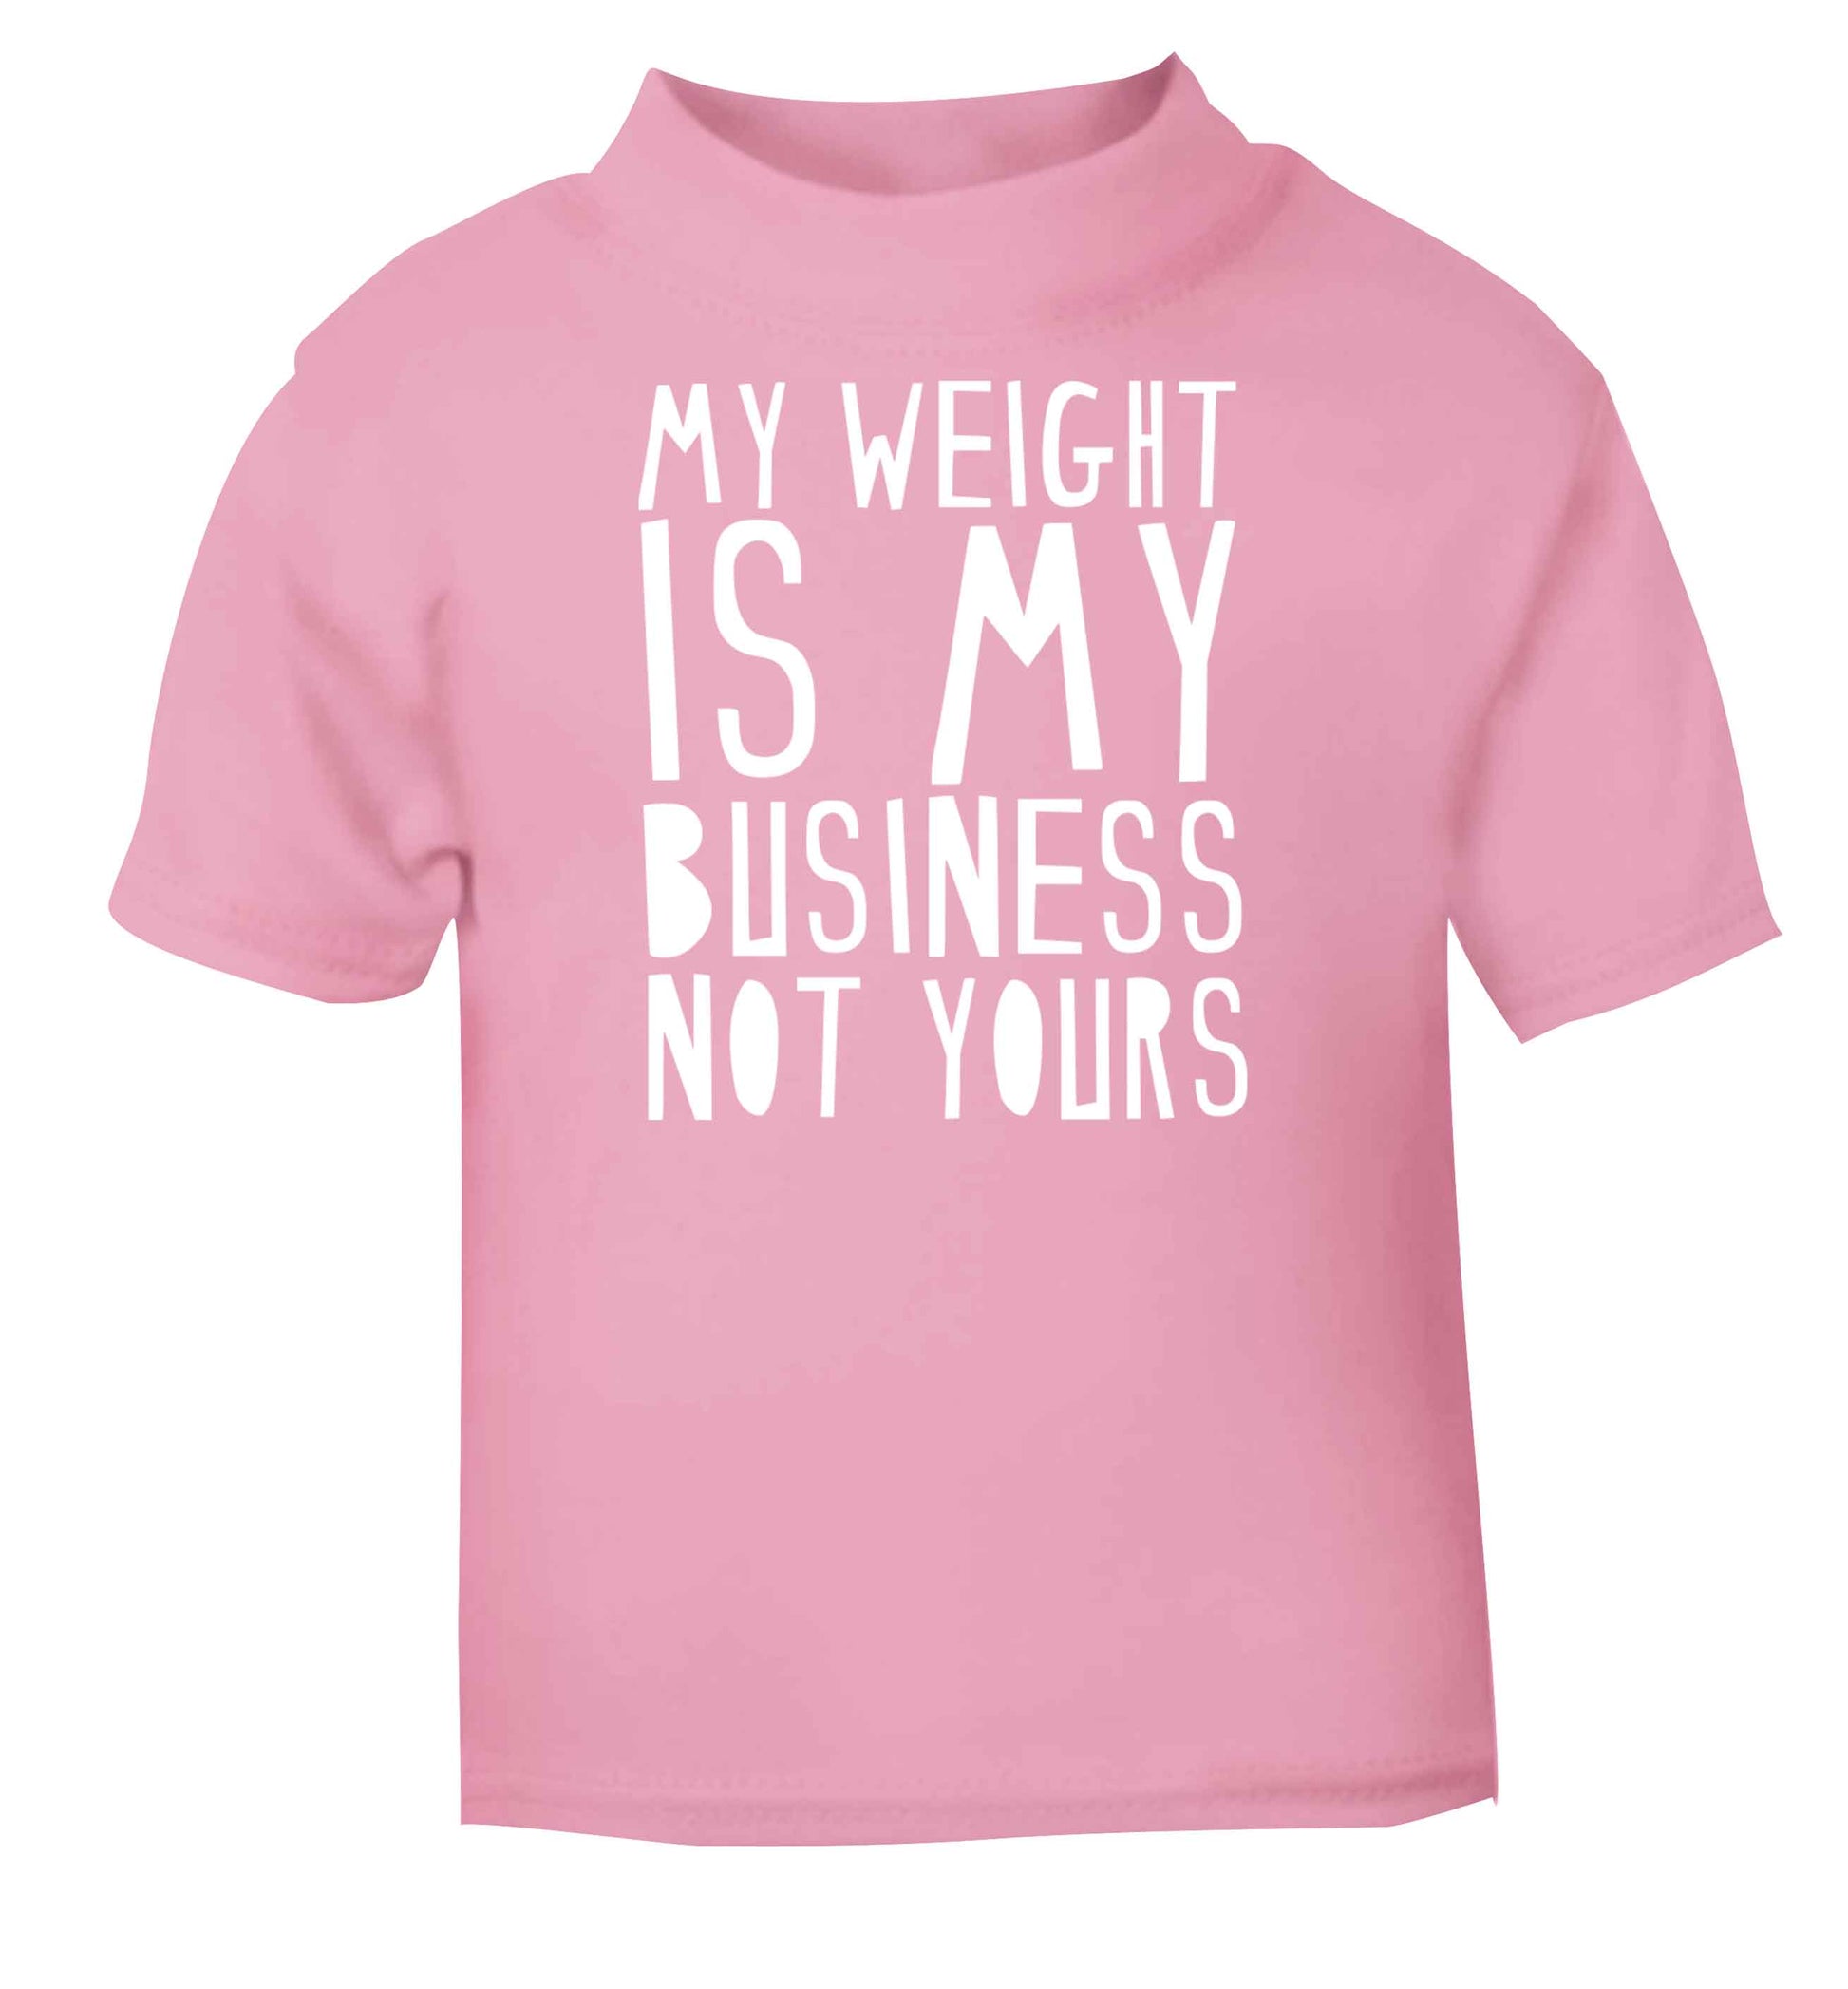 My weight is my business not yours light pink baby toddler Tshirt 2 Years